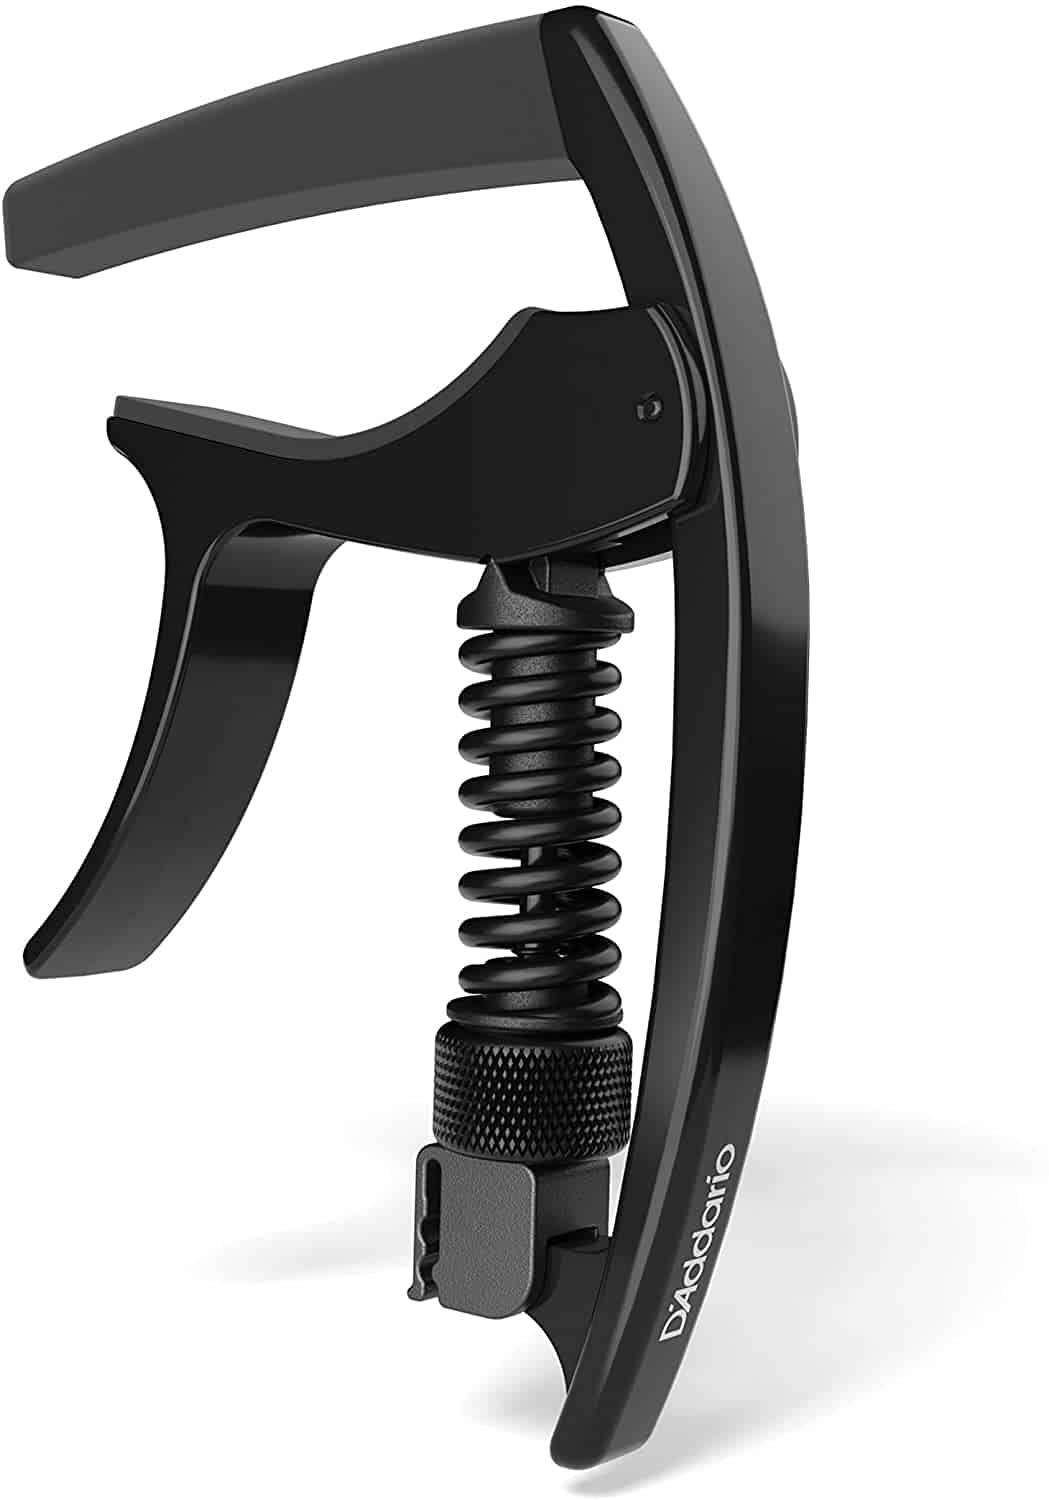 D’Addario NS Tri-Action Capo, Black – For 6-String Electric and Acoustic Guitars – Micrometer Tension Adjustment for Buzz-Free, In-Tune Performance - Single Hand Use – Integrated Pick Holder